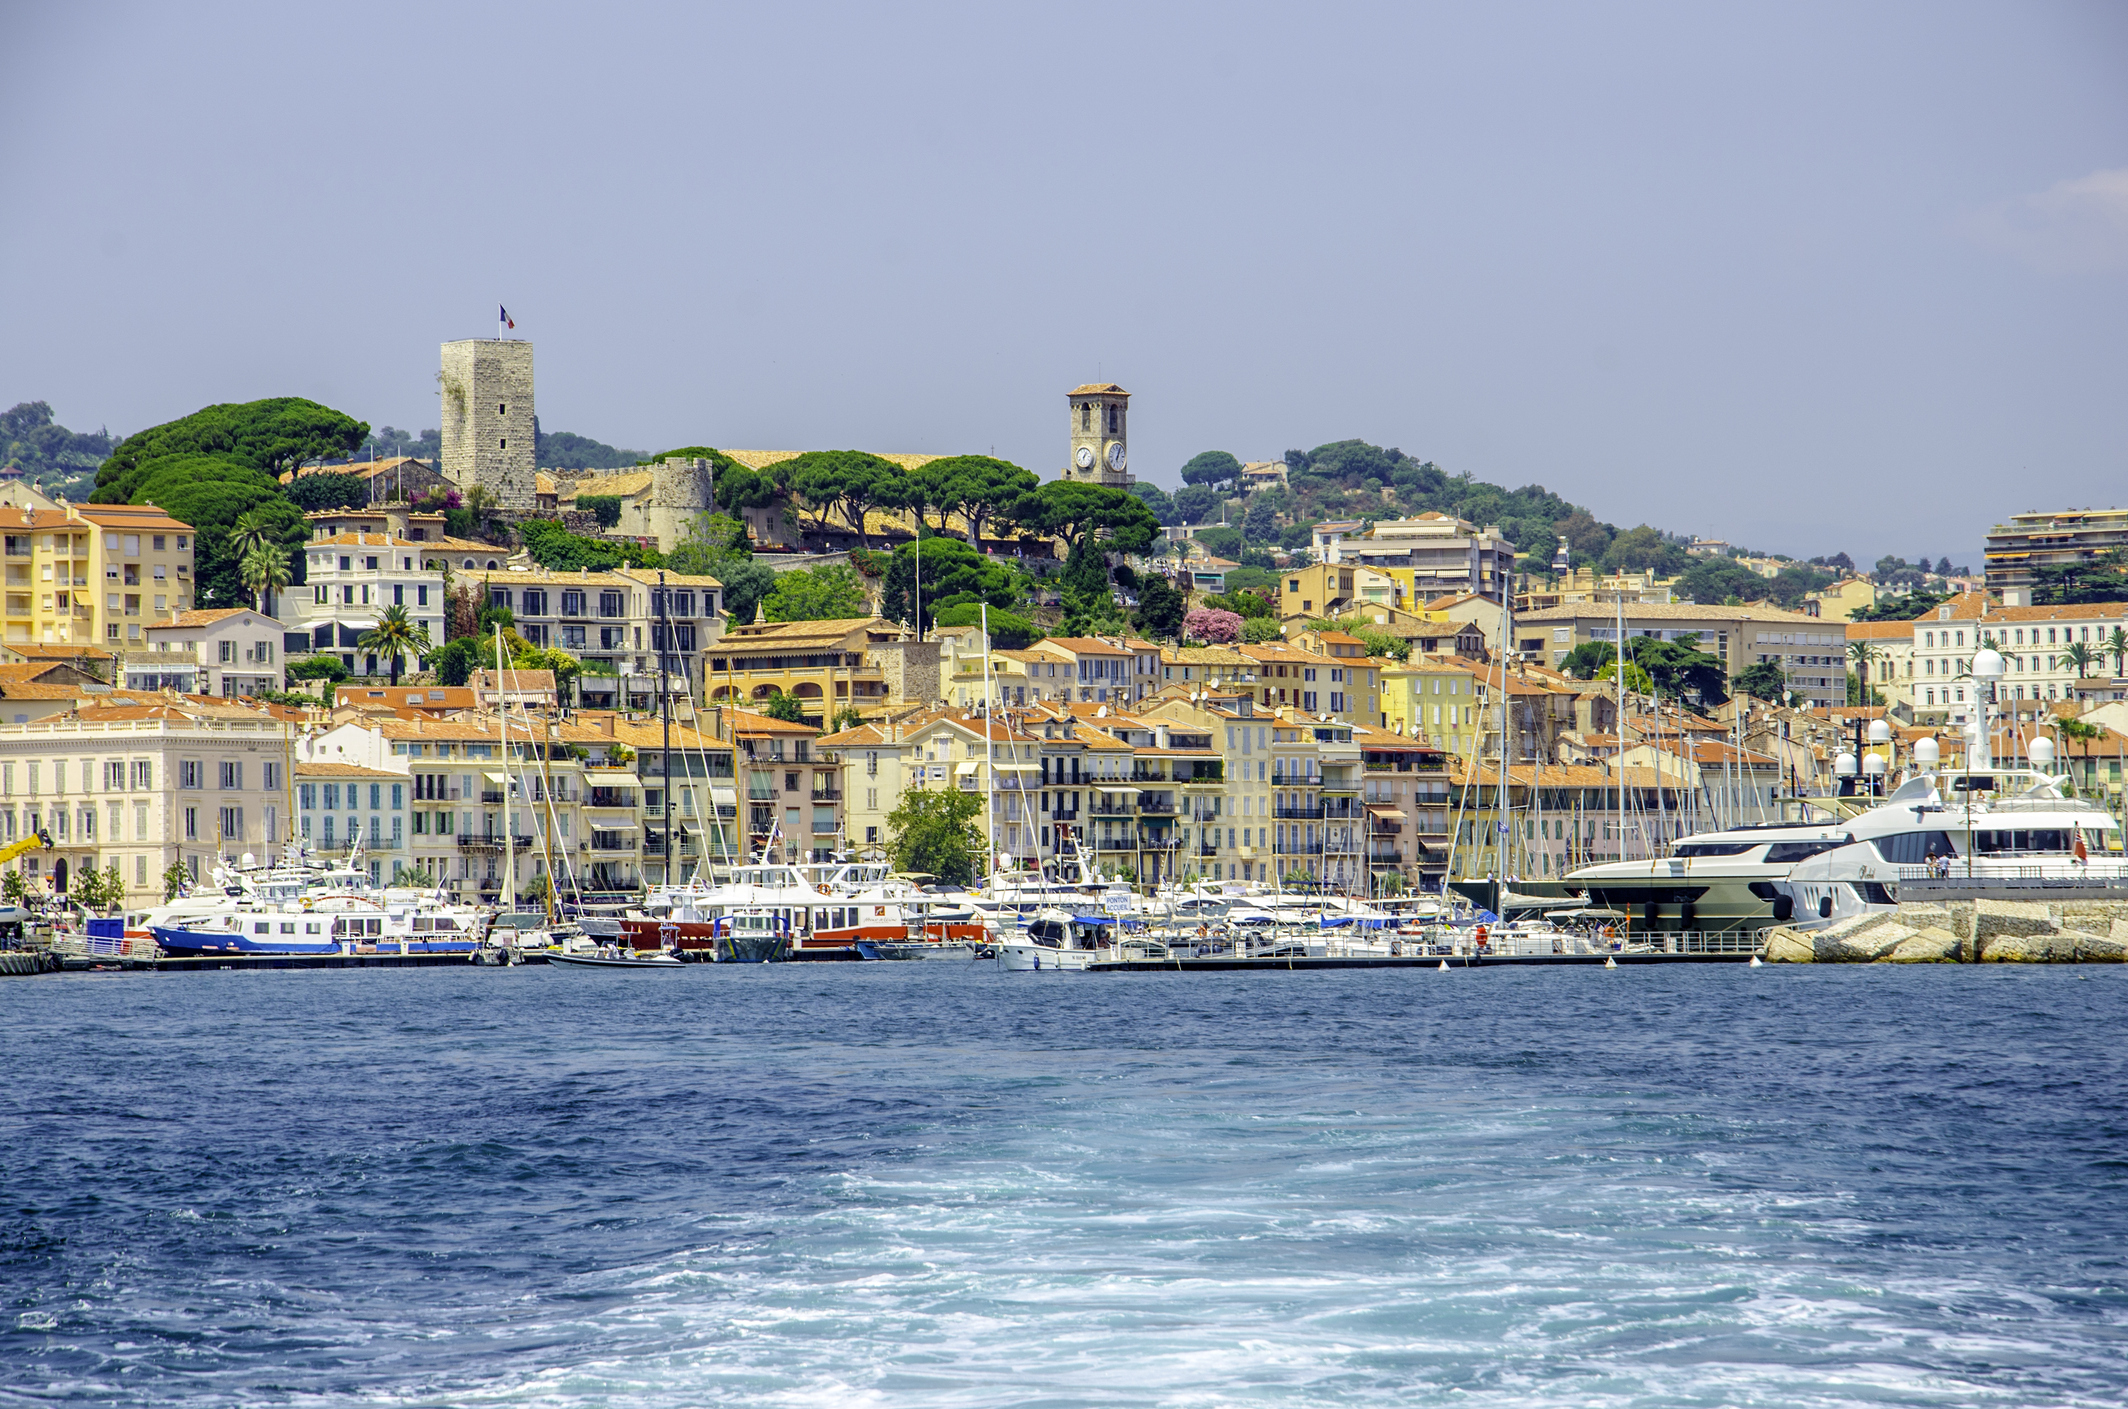 Will you be in Cannes for MIPIM?